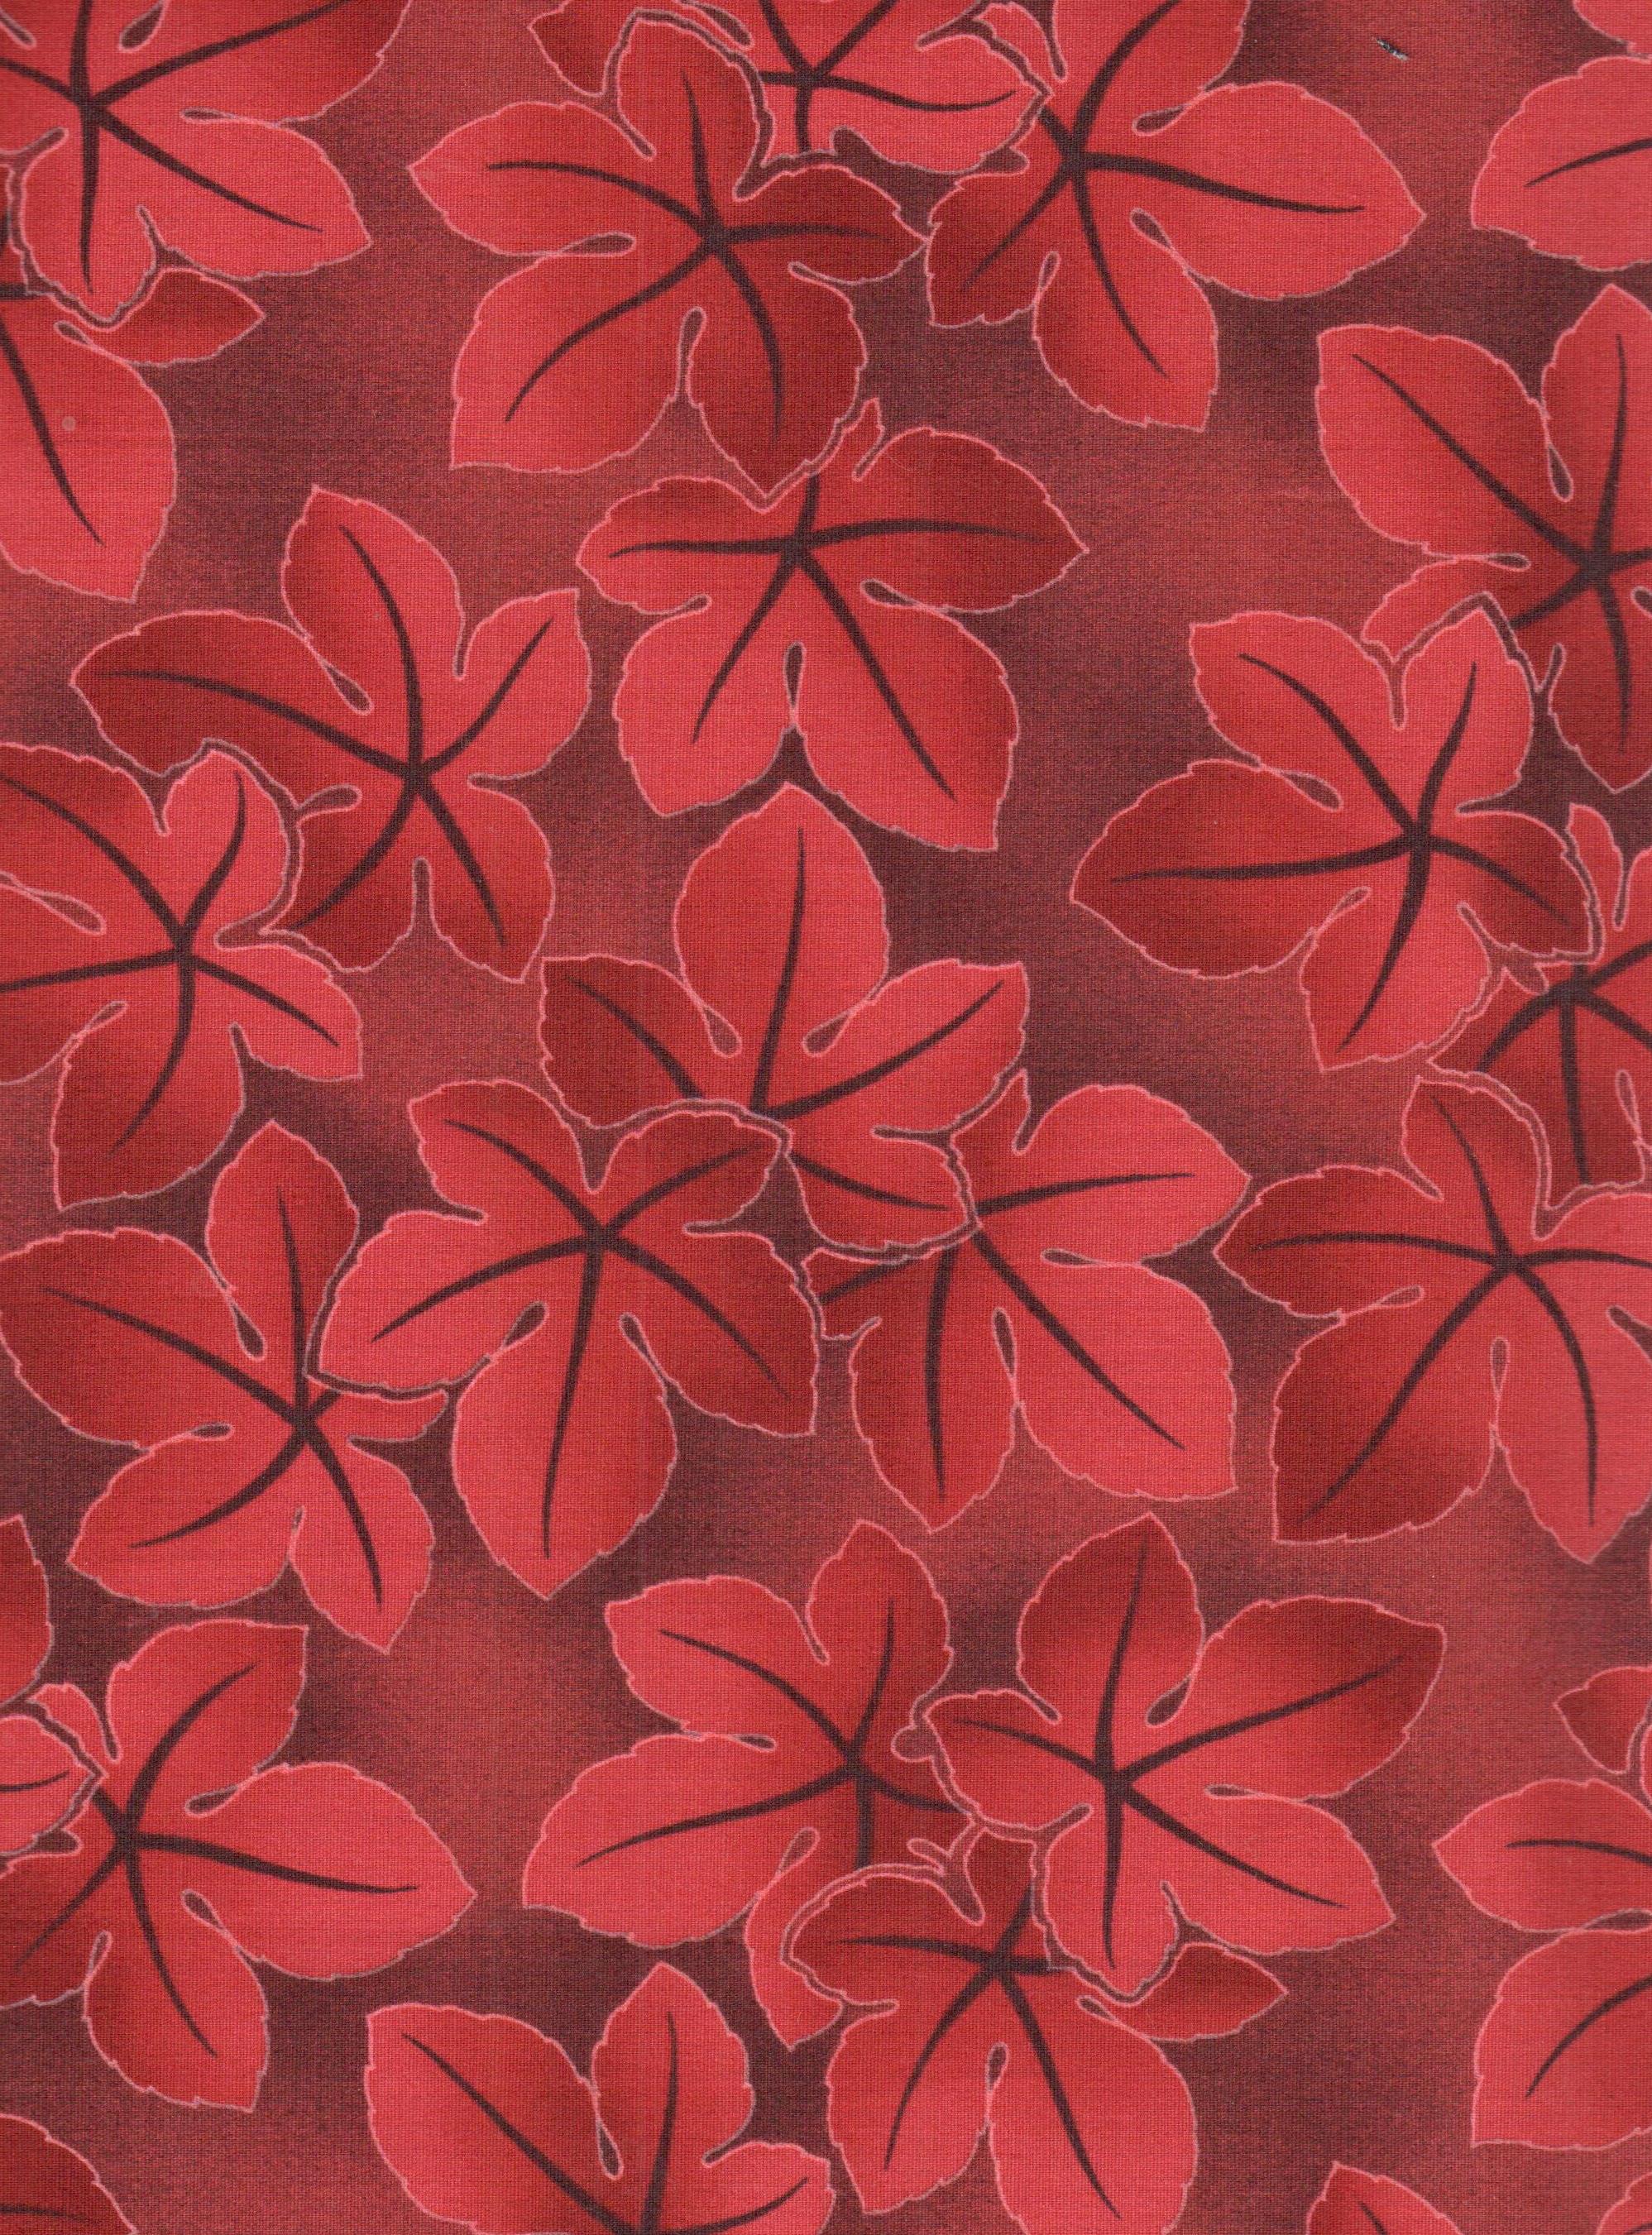 Red Leaf quilt fabric